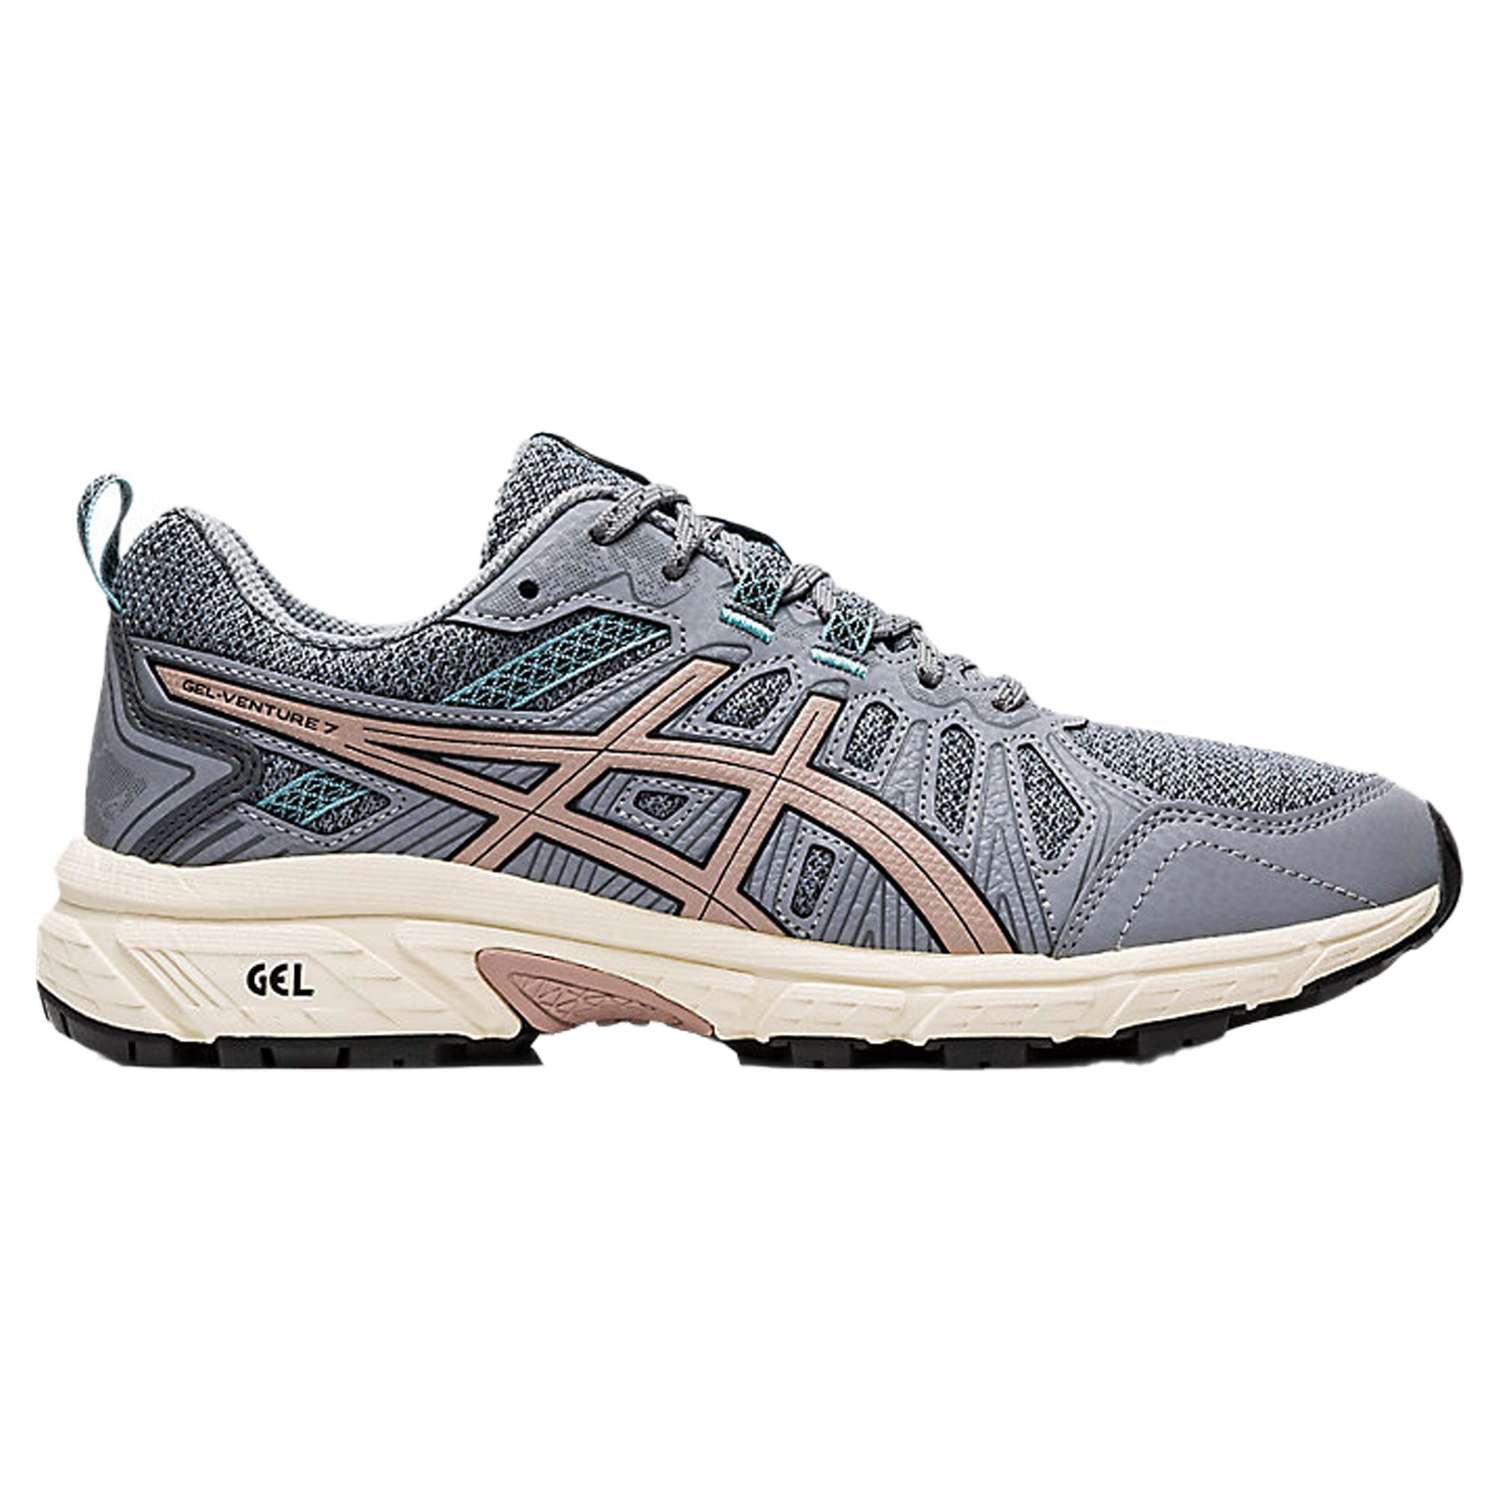 The Best Running Shoes For Pronation And Why I Recommend Them (2021) Asics Women's Gel-Venture 7 Trail Running Shoes